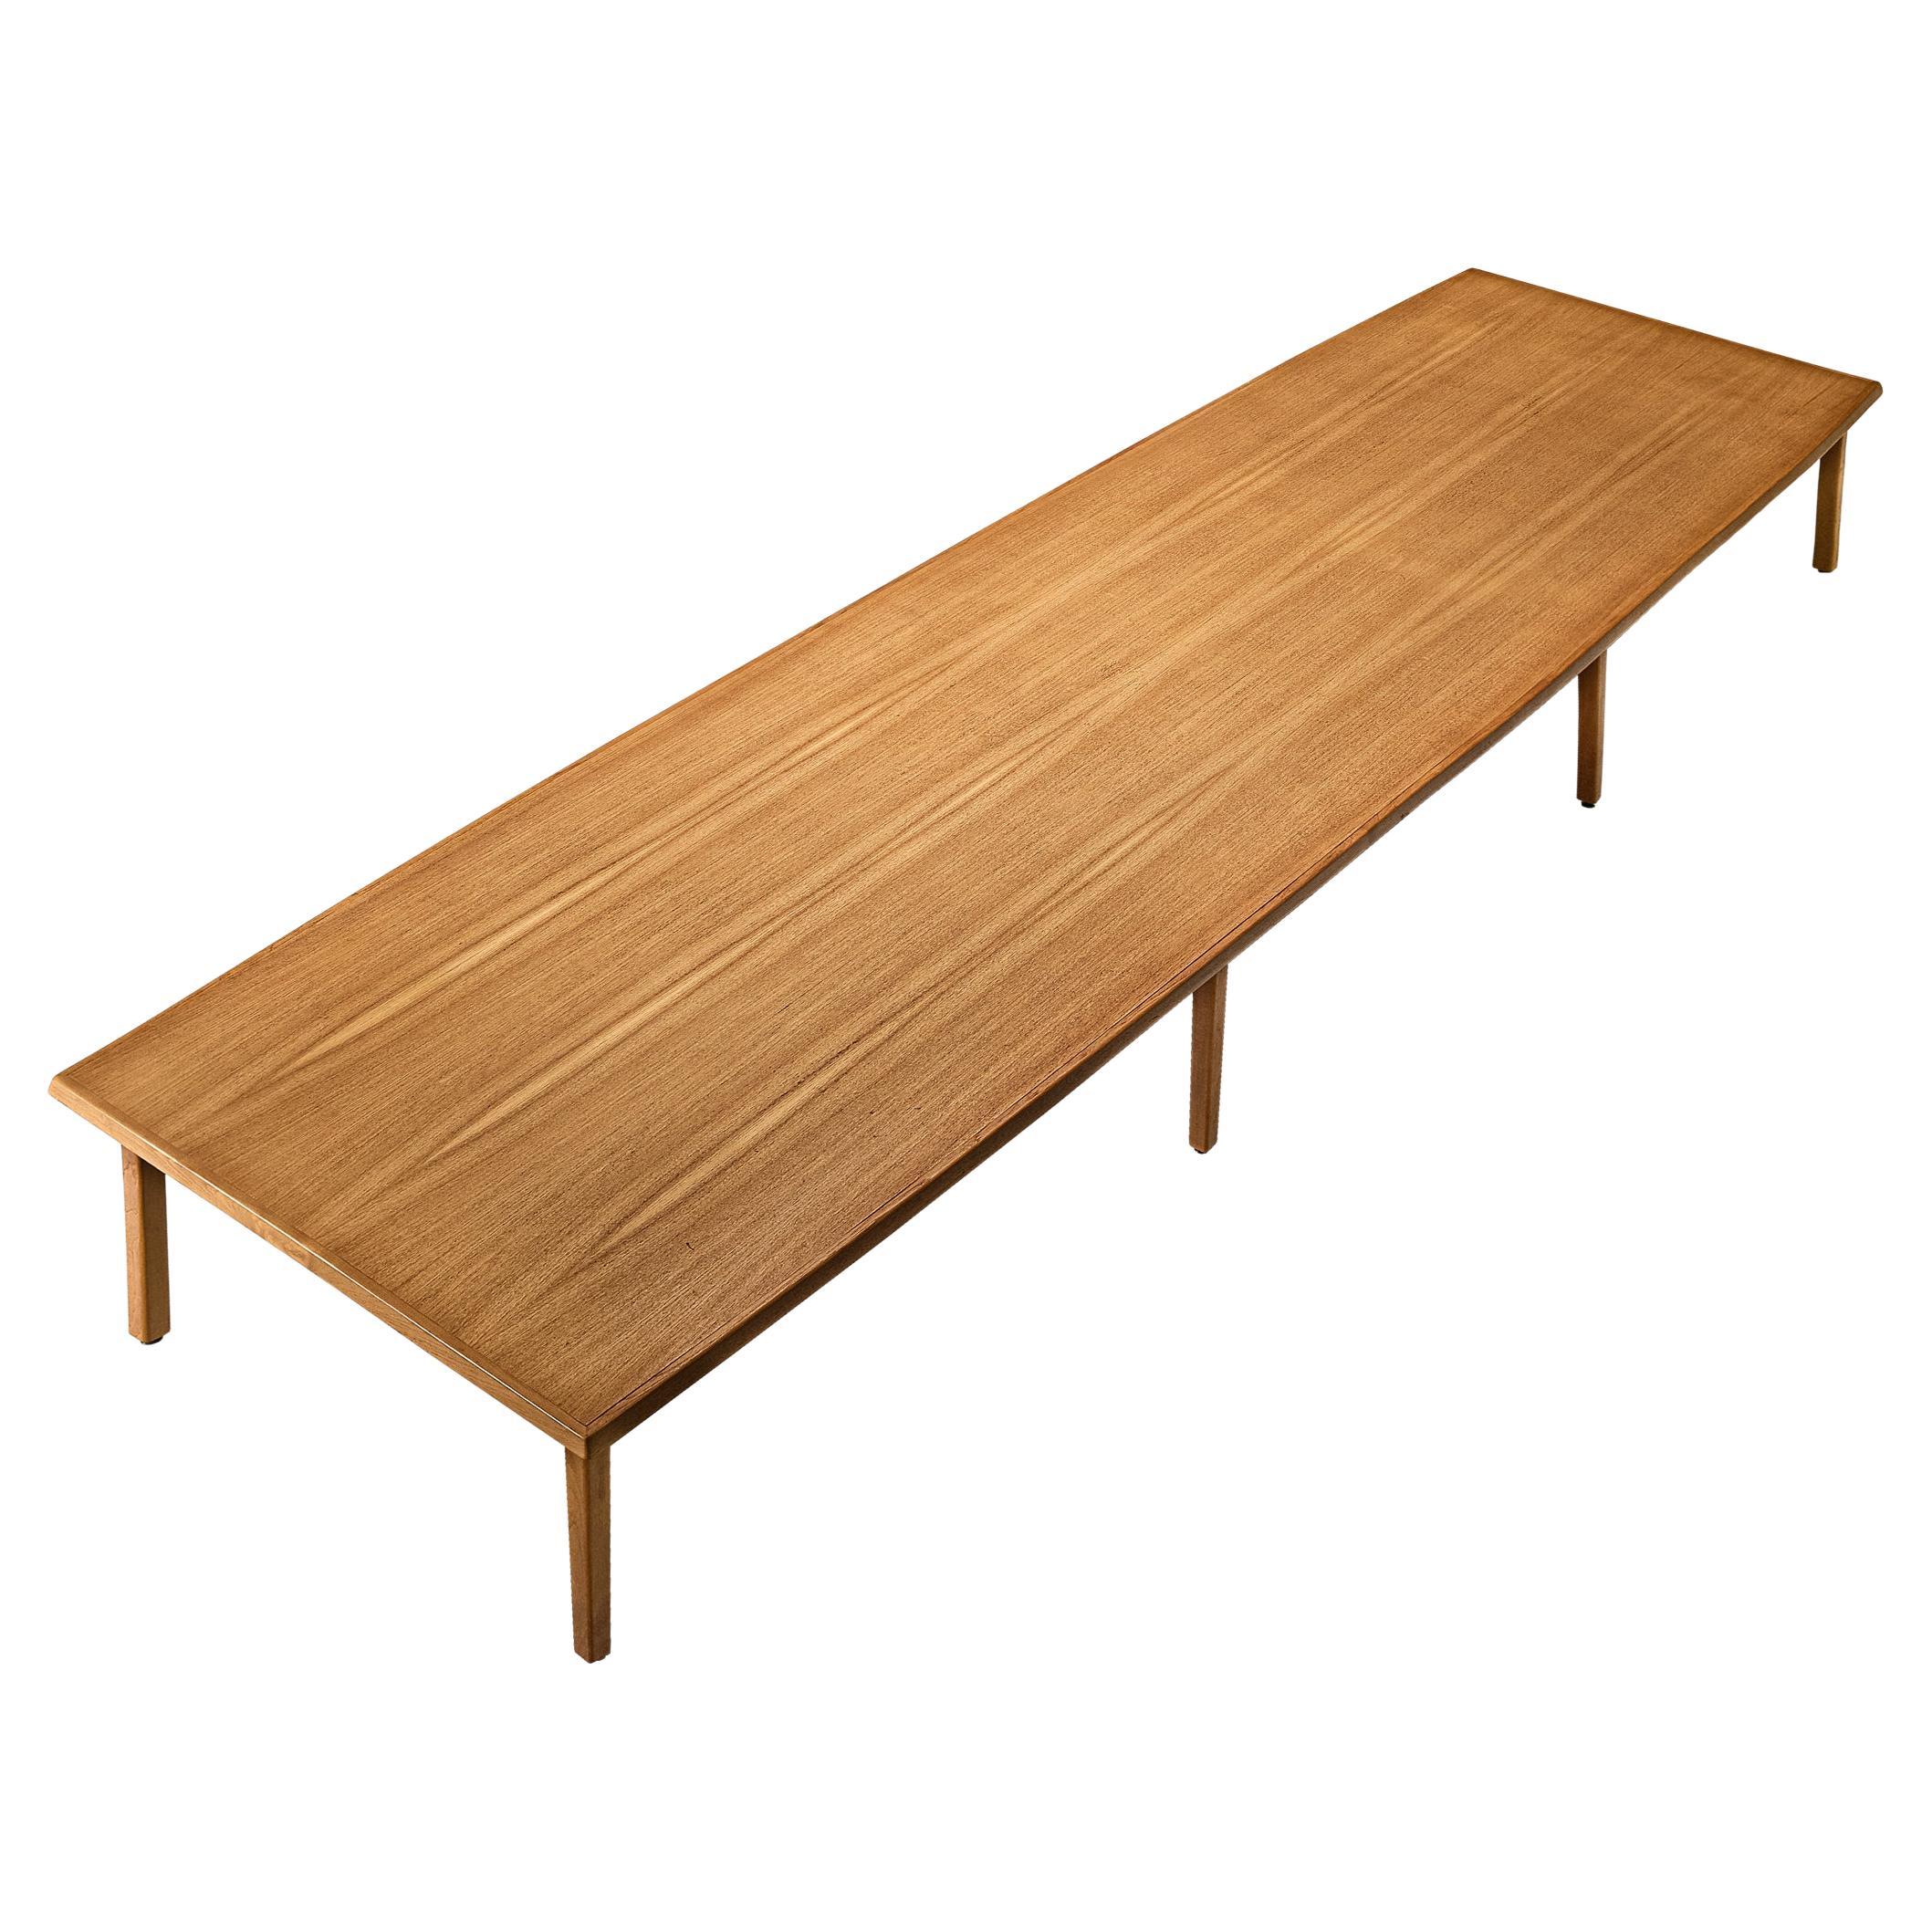 Large Danish Conference or Dining Table in Teak 16 feet 